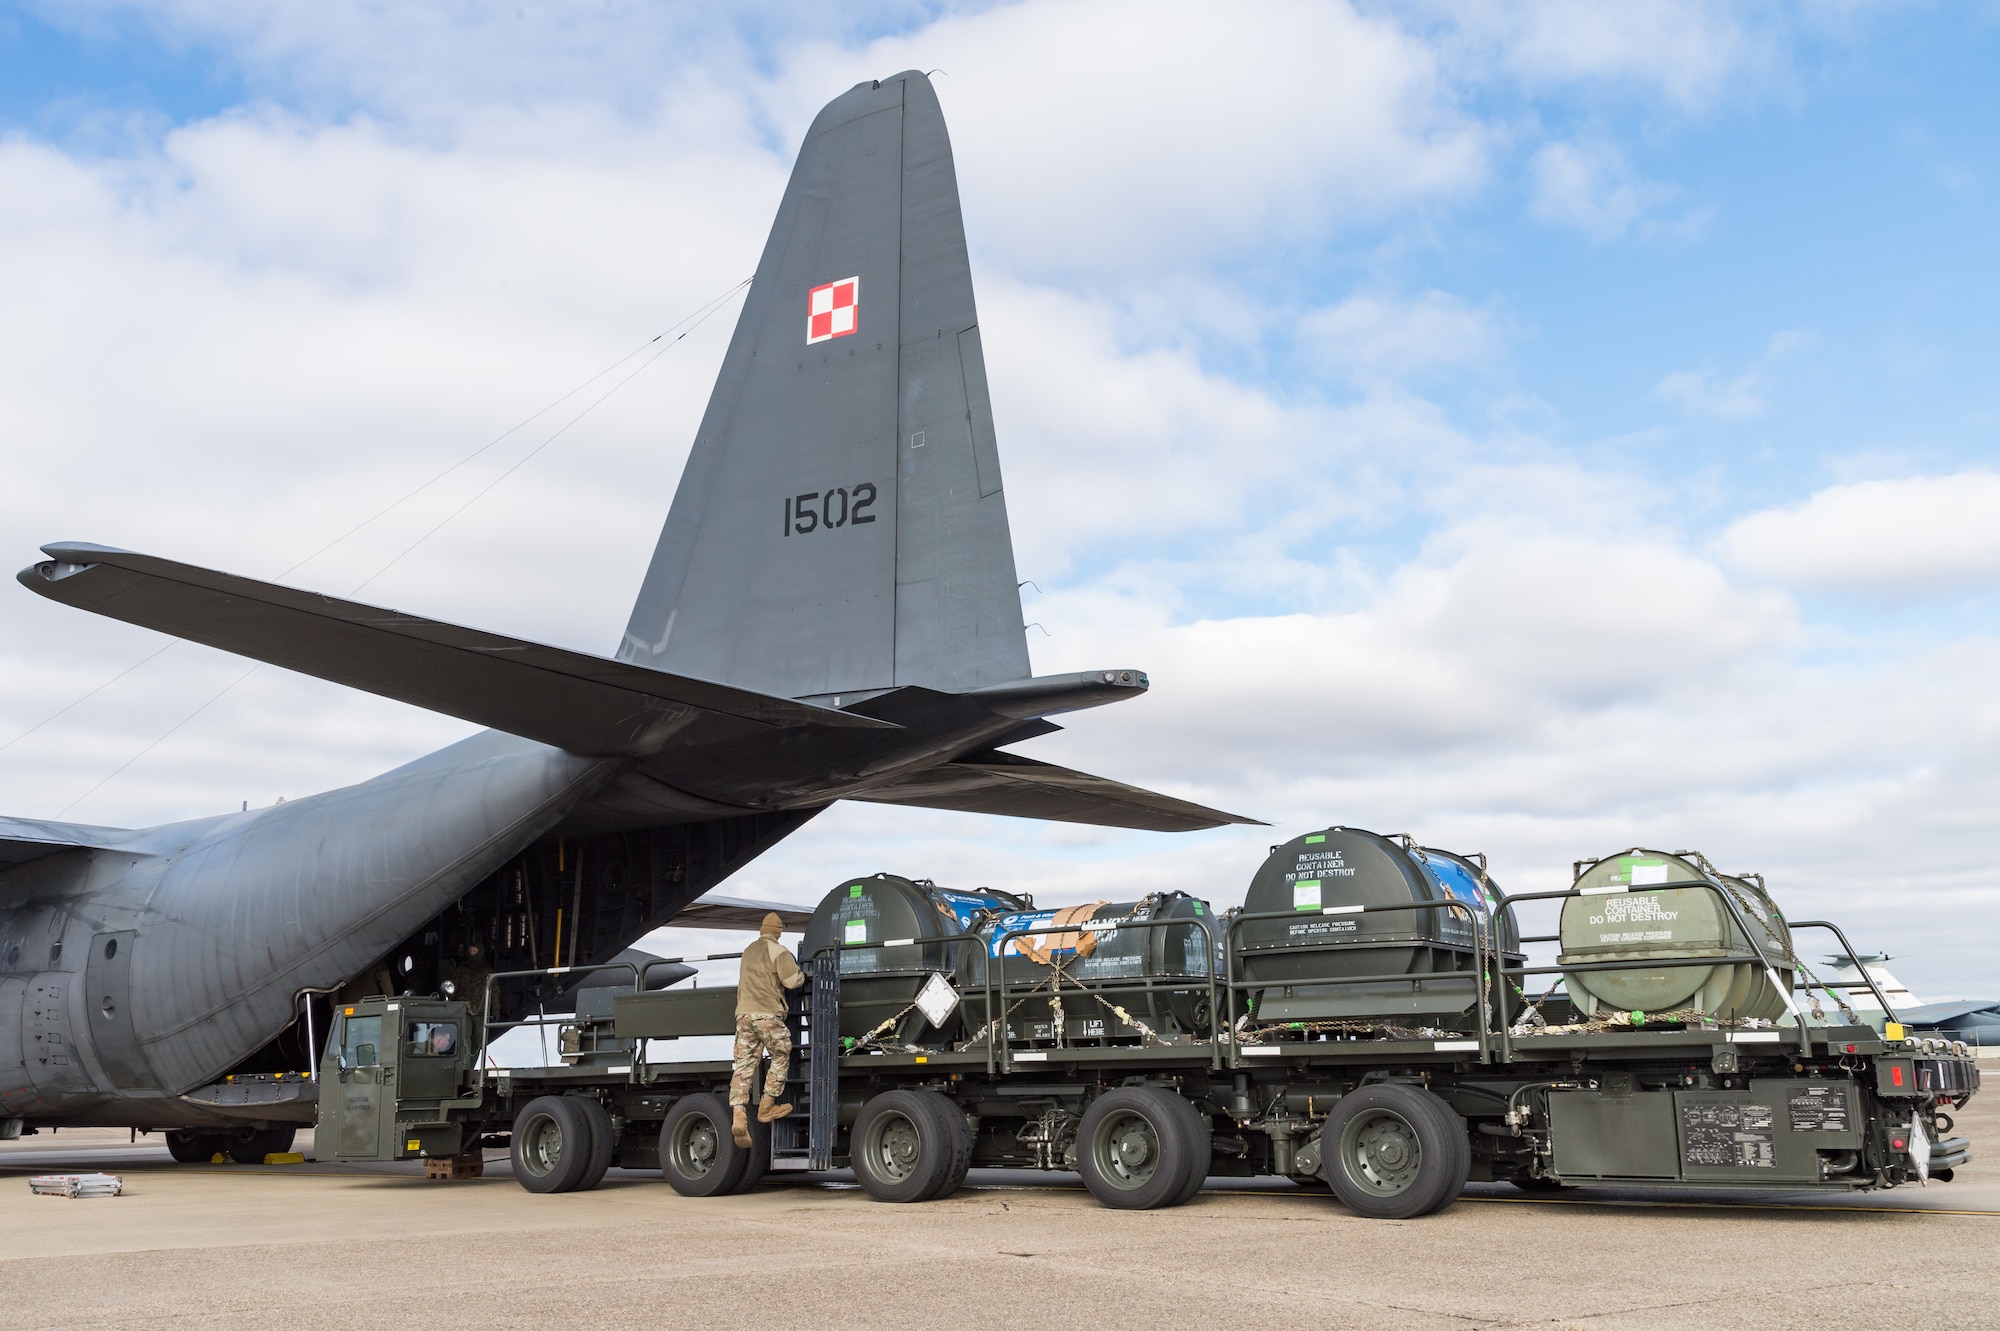 Airmen from 436th Aerial Port Squadron secure pallets on a cargo loader after unloading a Polish air force C-130E Hercules Dec. 17, 2020, at Dover Air Force Base, Delaware, as part of a foreign military sales project. The United States and Poland have enjoyed warm bilateral relations since 1989. Poland is a stalwart NATO ally, with which the U.S. partners closely on NATO capabilities, counterterrorism, nonproliferation, missile defense and regional cooperation in Central and Eastern Europe. Due to its strategic location, Dover AFB supports approximately $3.5 billion worth of foreign military sales annually. (U.S. Air Force photo by Roland Balik)